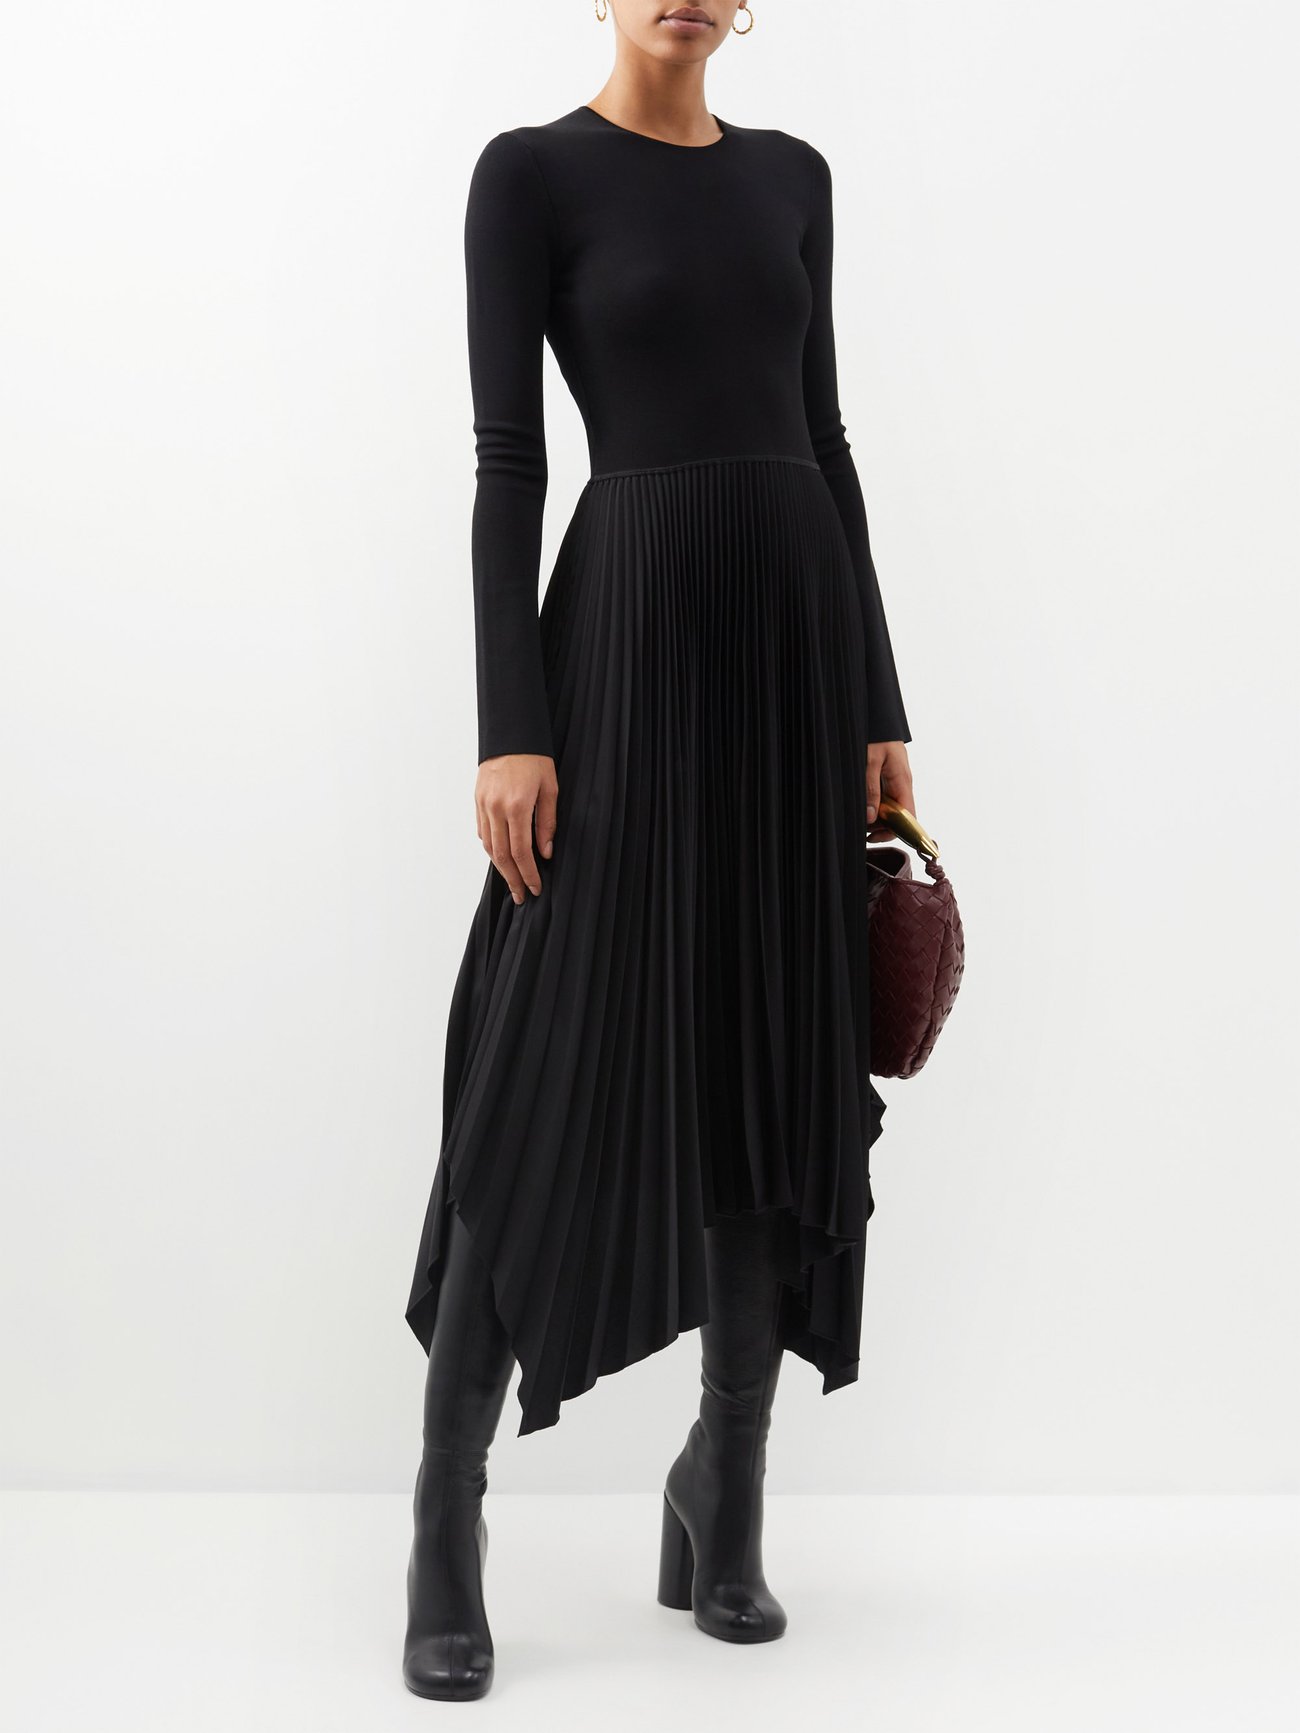 Joseph's black Deron midi dress is made from a technical smooth knit with elongated sleeves and an asymmetric pleated skirt that falls to a handkerchief hem.